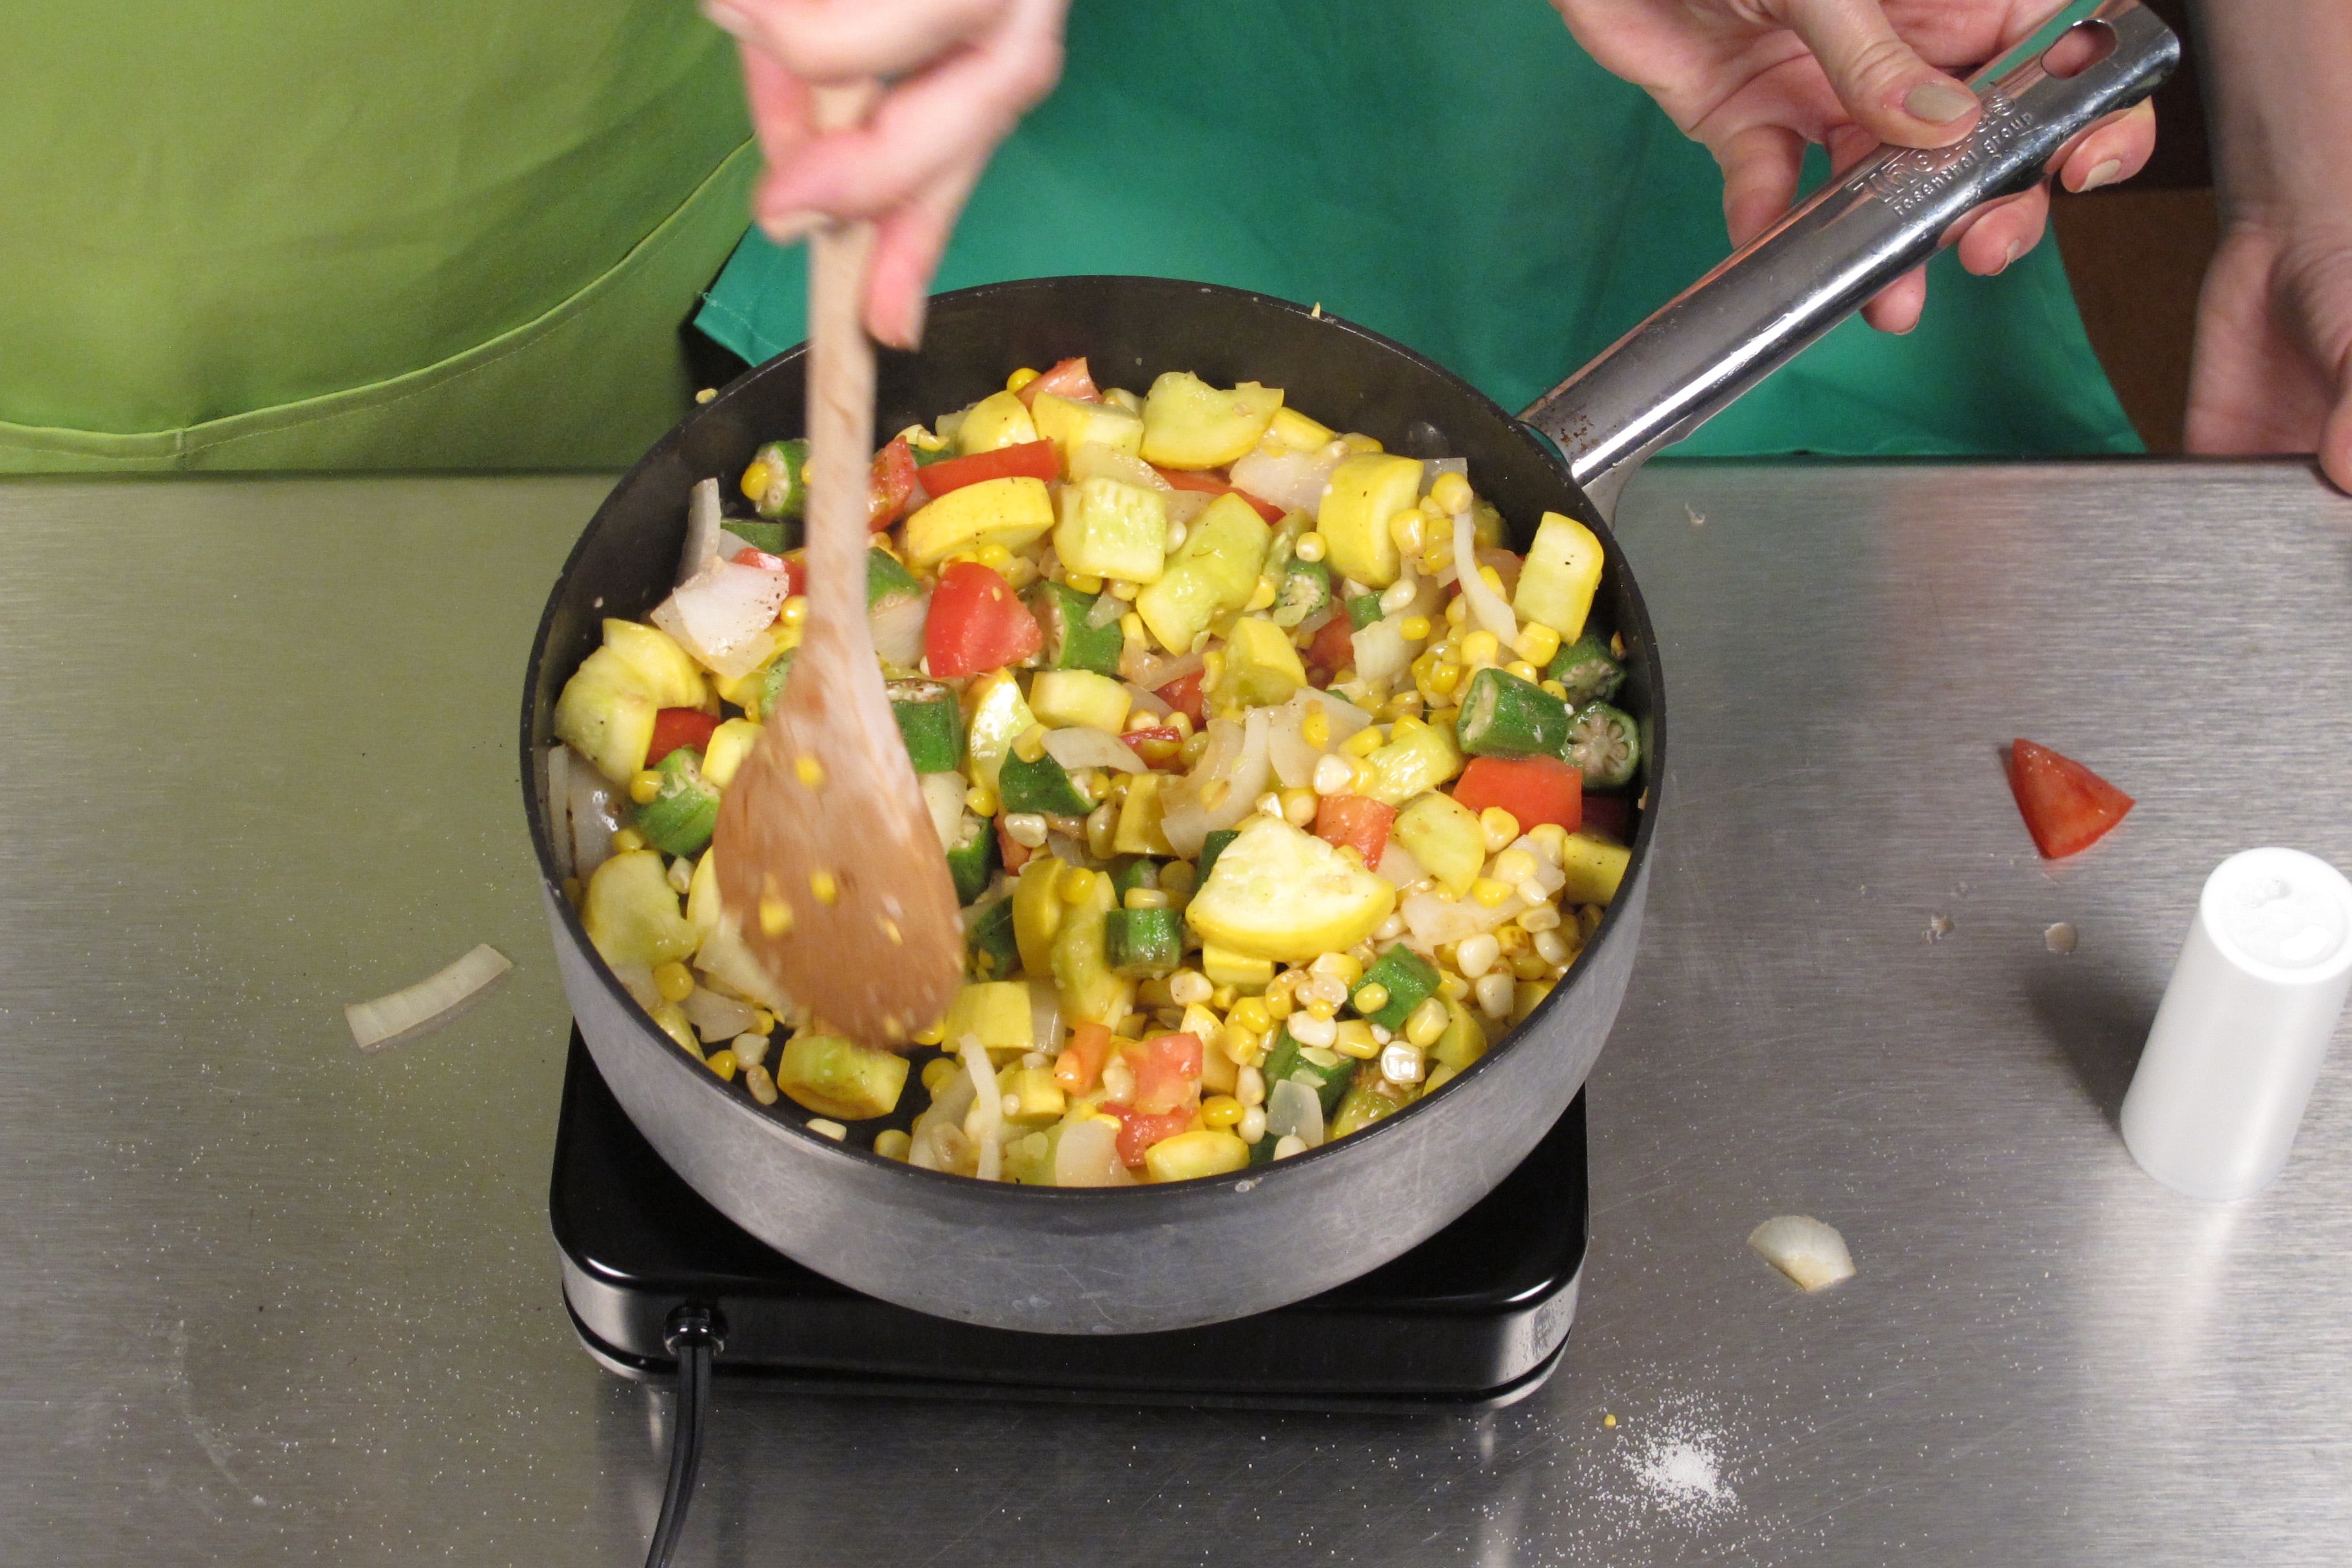 In a large skillet over medium heat, cook oil, onion, corn, squash, and okra for 5 minutes.